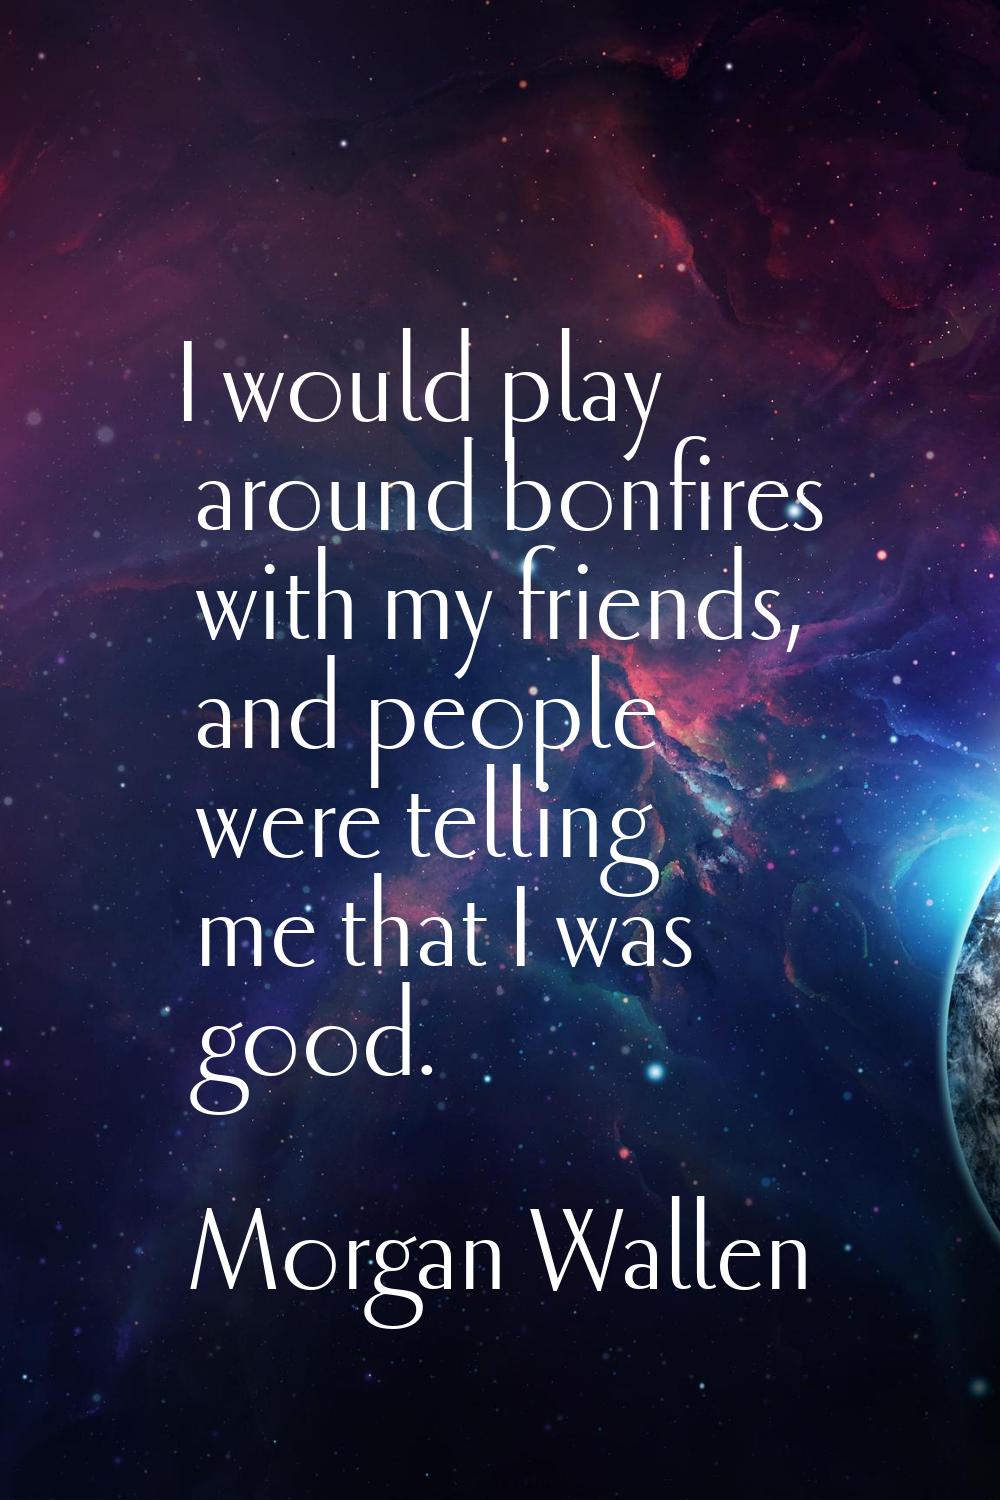 I would play around bonfires with my friends, and people were telling me that I was good.